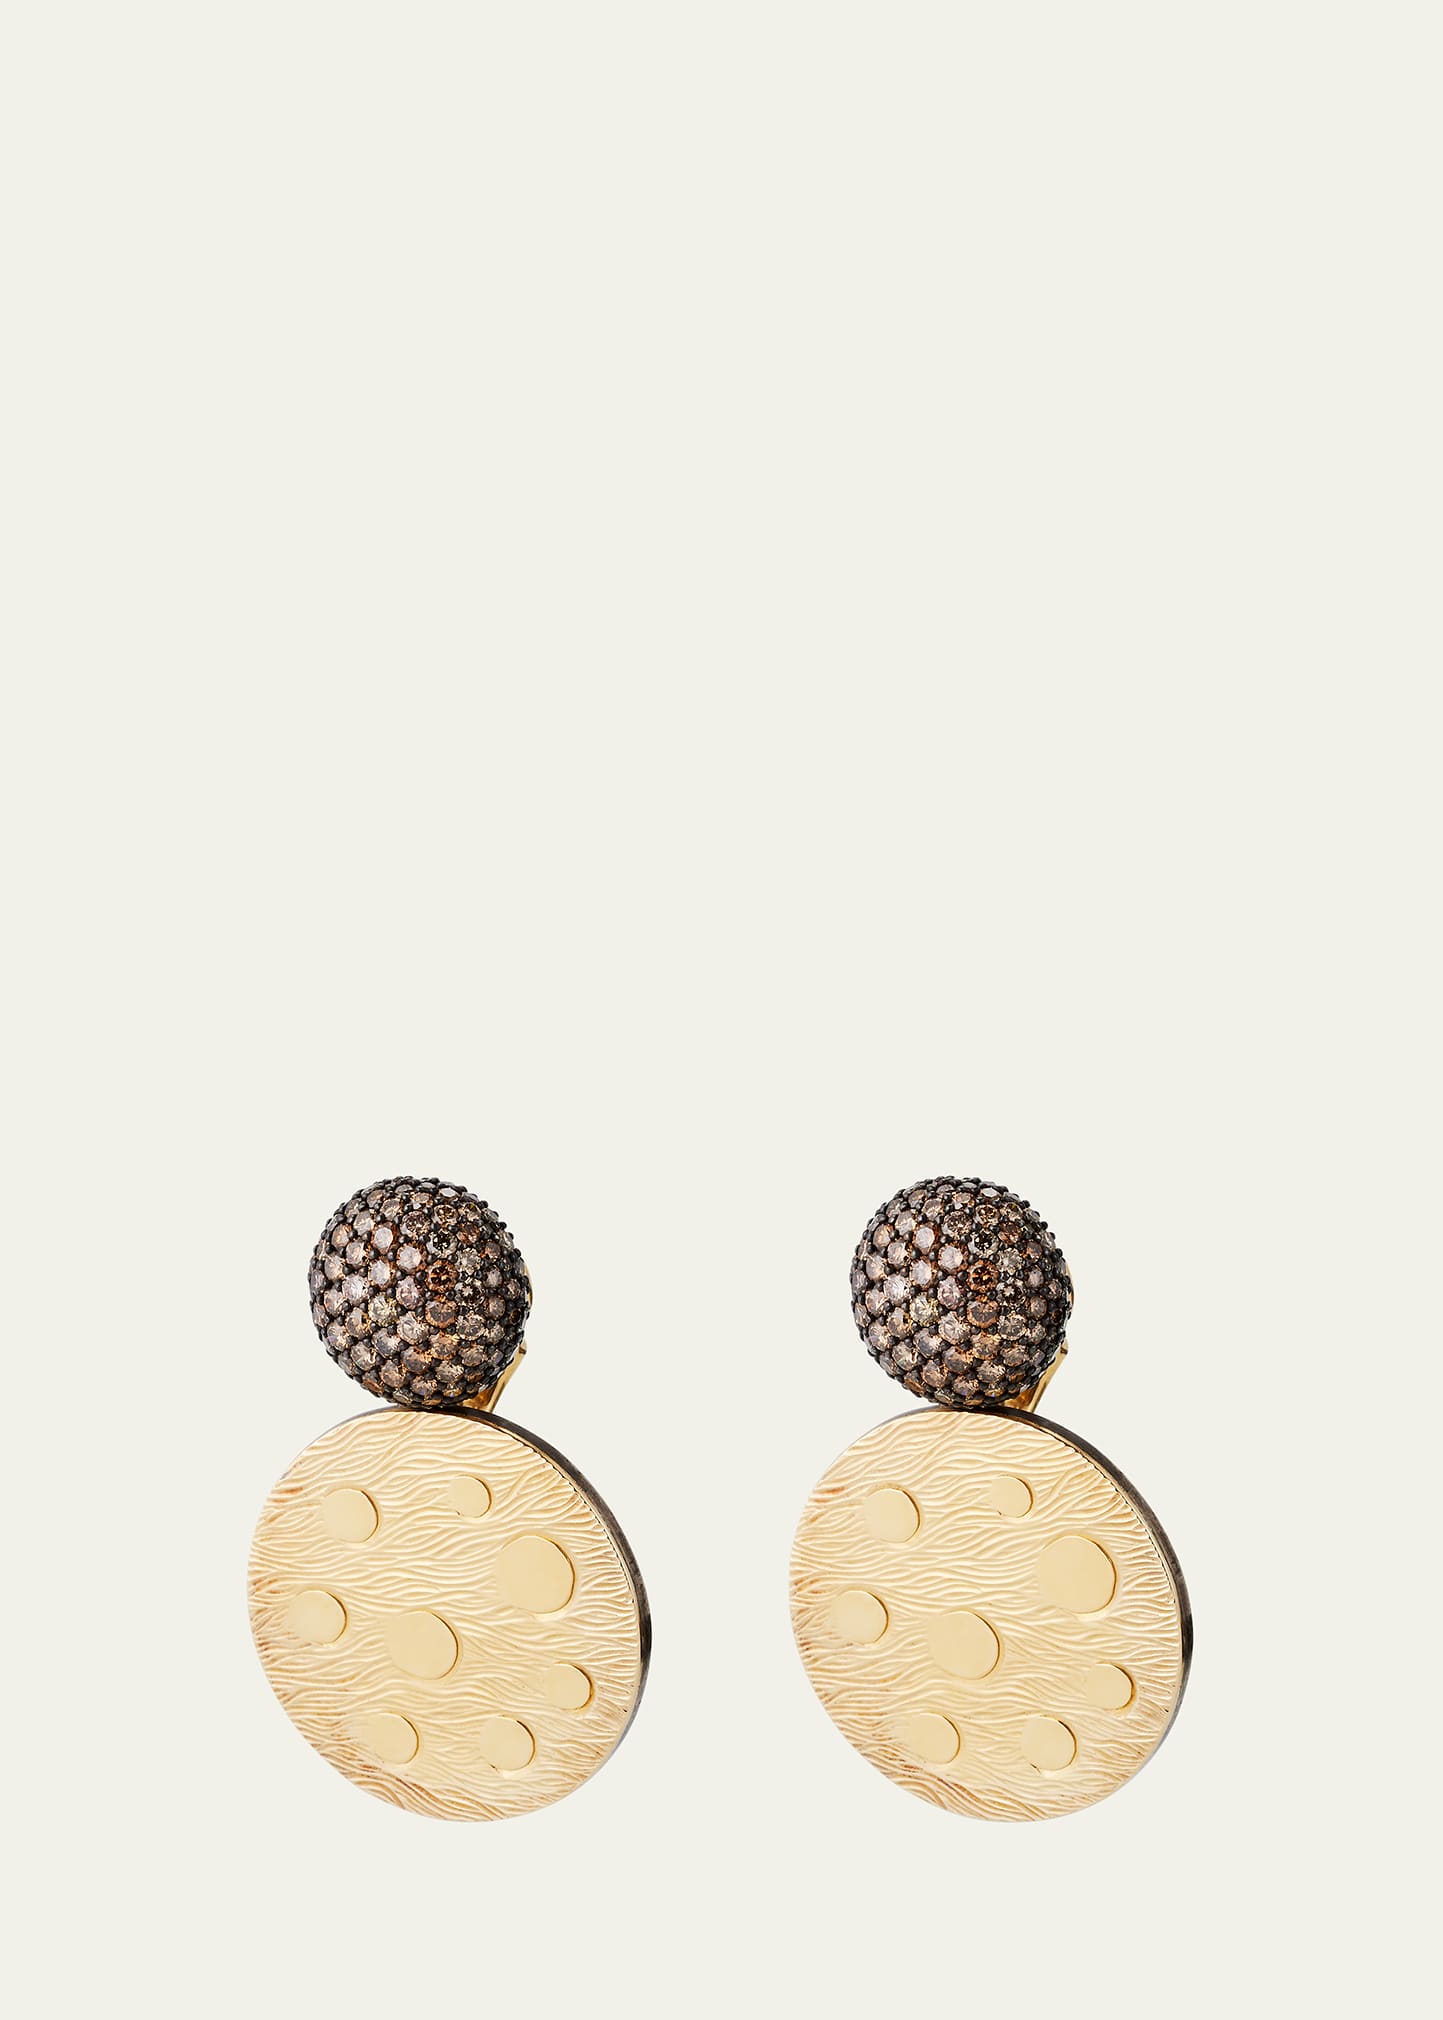 Vram Yellow Gold And Silver Tau Disco Earrings With Brown Diamonds